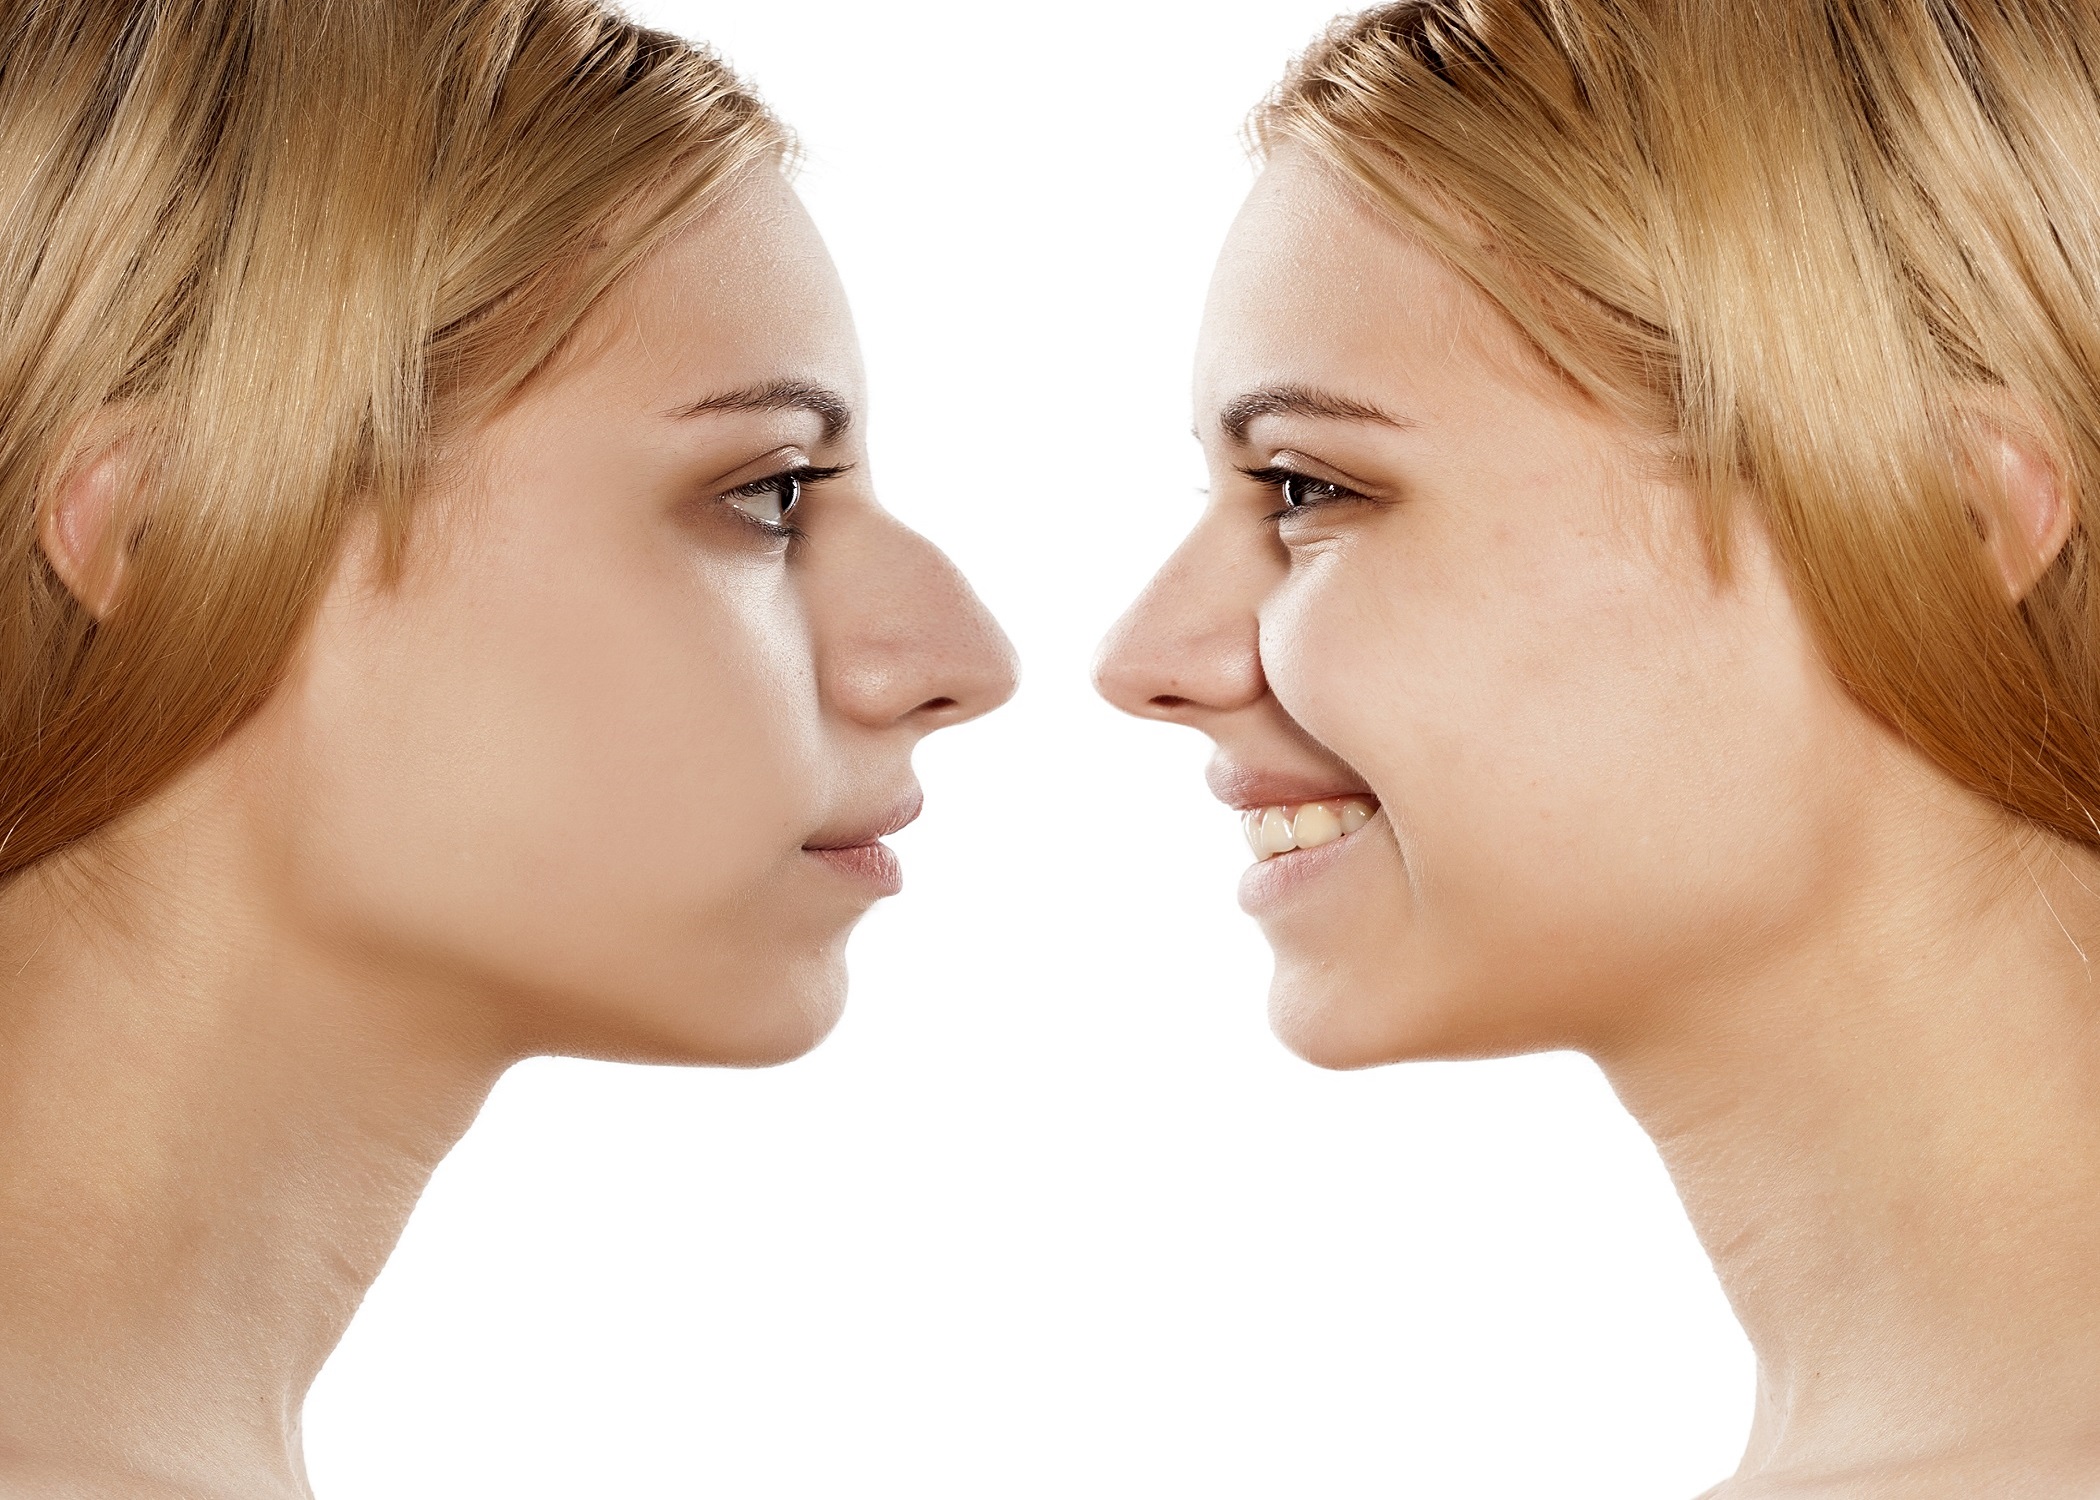 before and after rhinoplasty (nose job) surgery